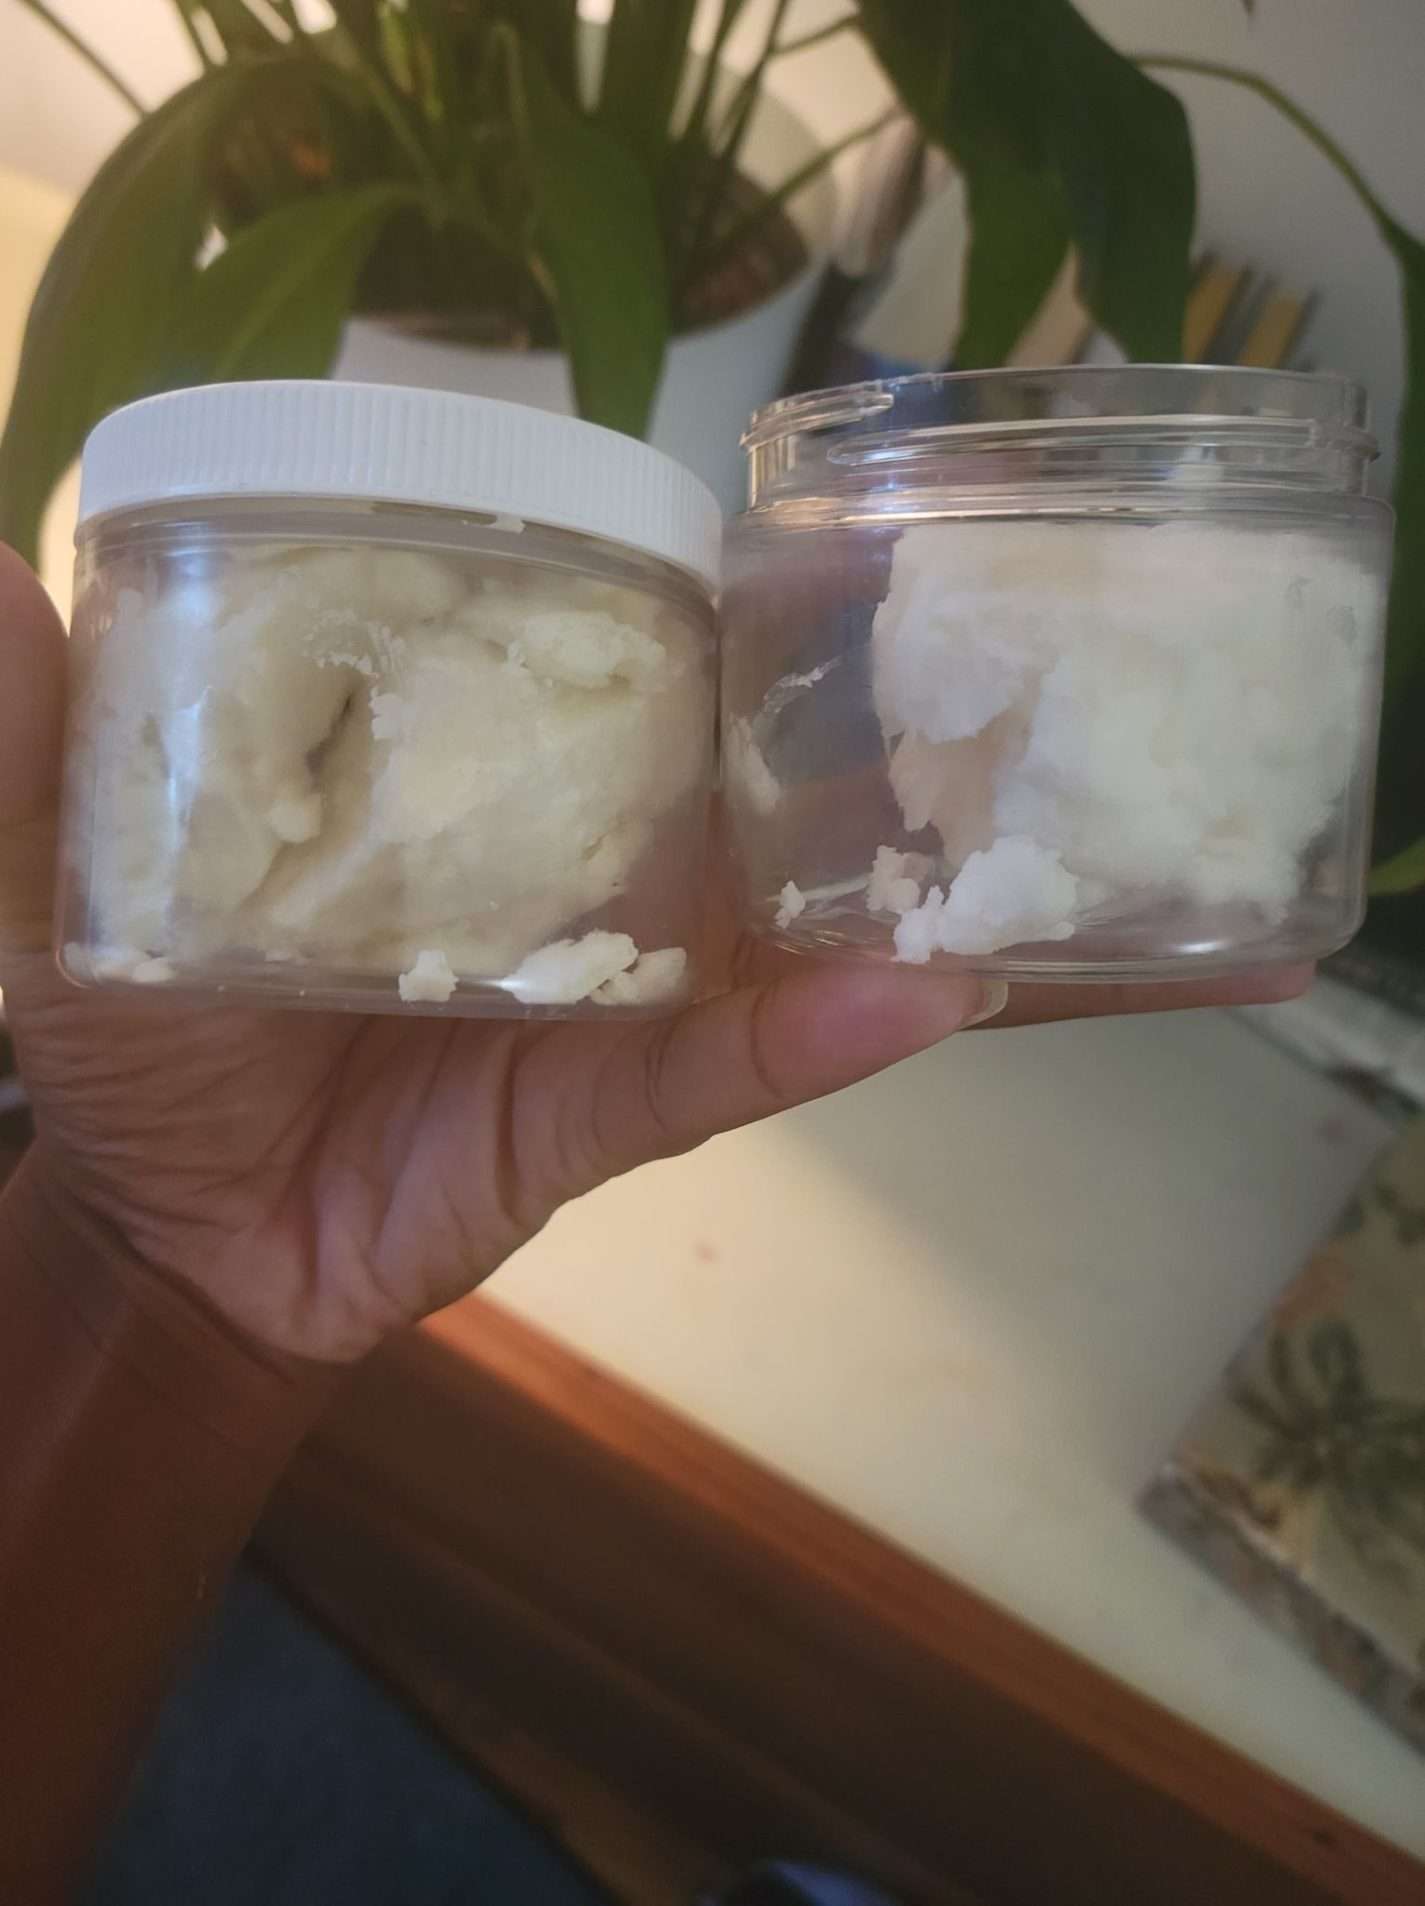 Raw shea butter on the left, refined shea butter on the right.